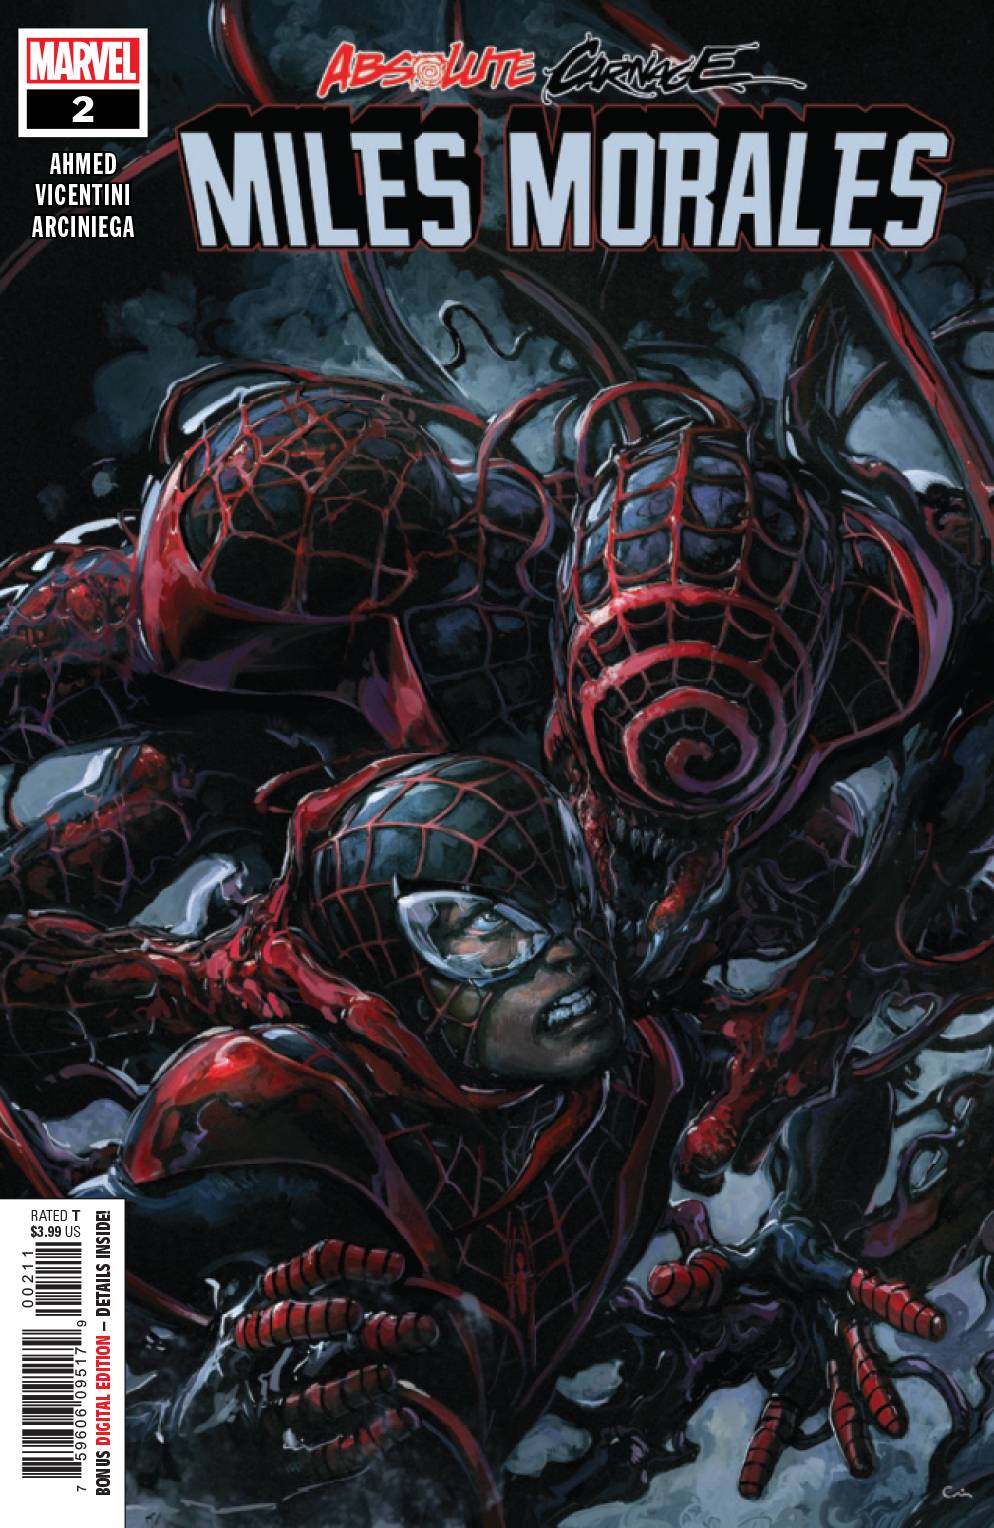 ABSOLUTE CARNAGE MILES MORALES #2 (OF 3) AC